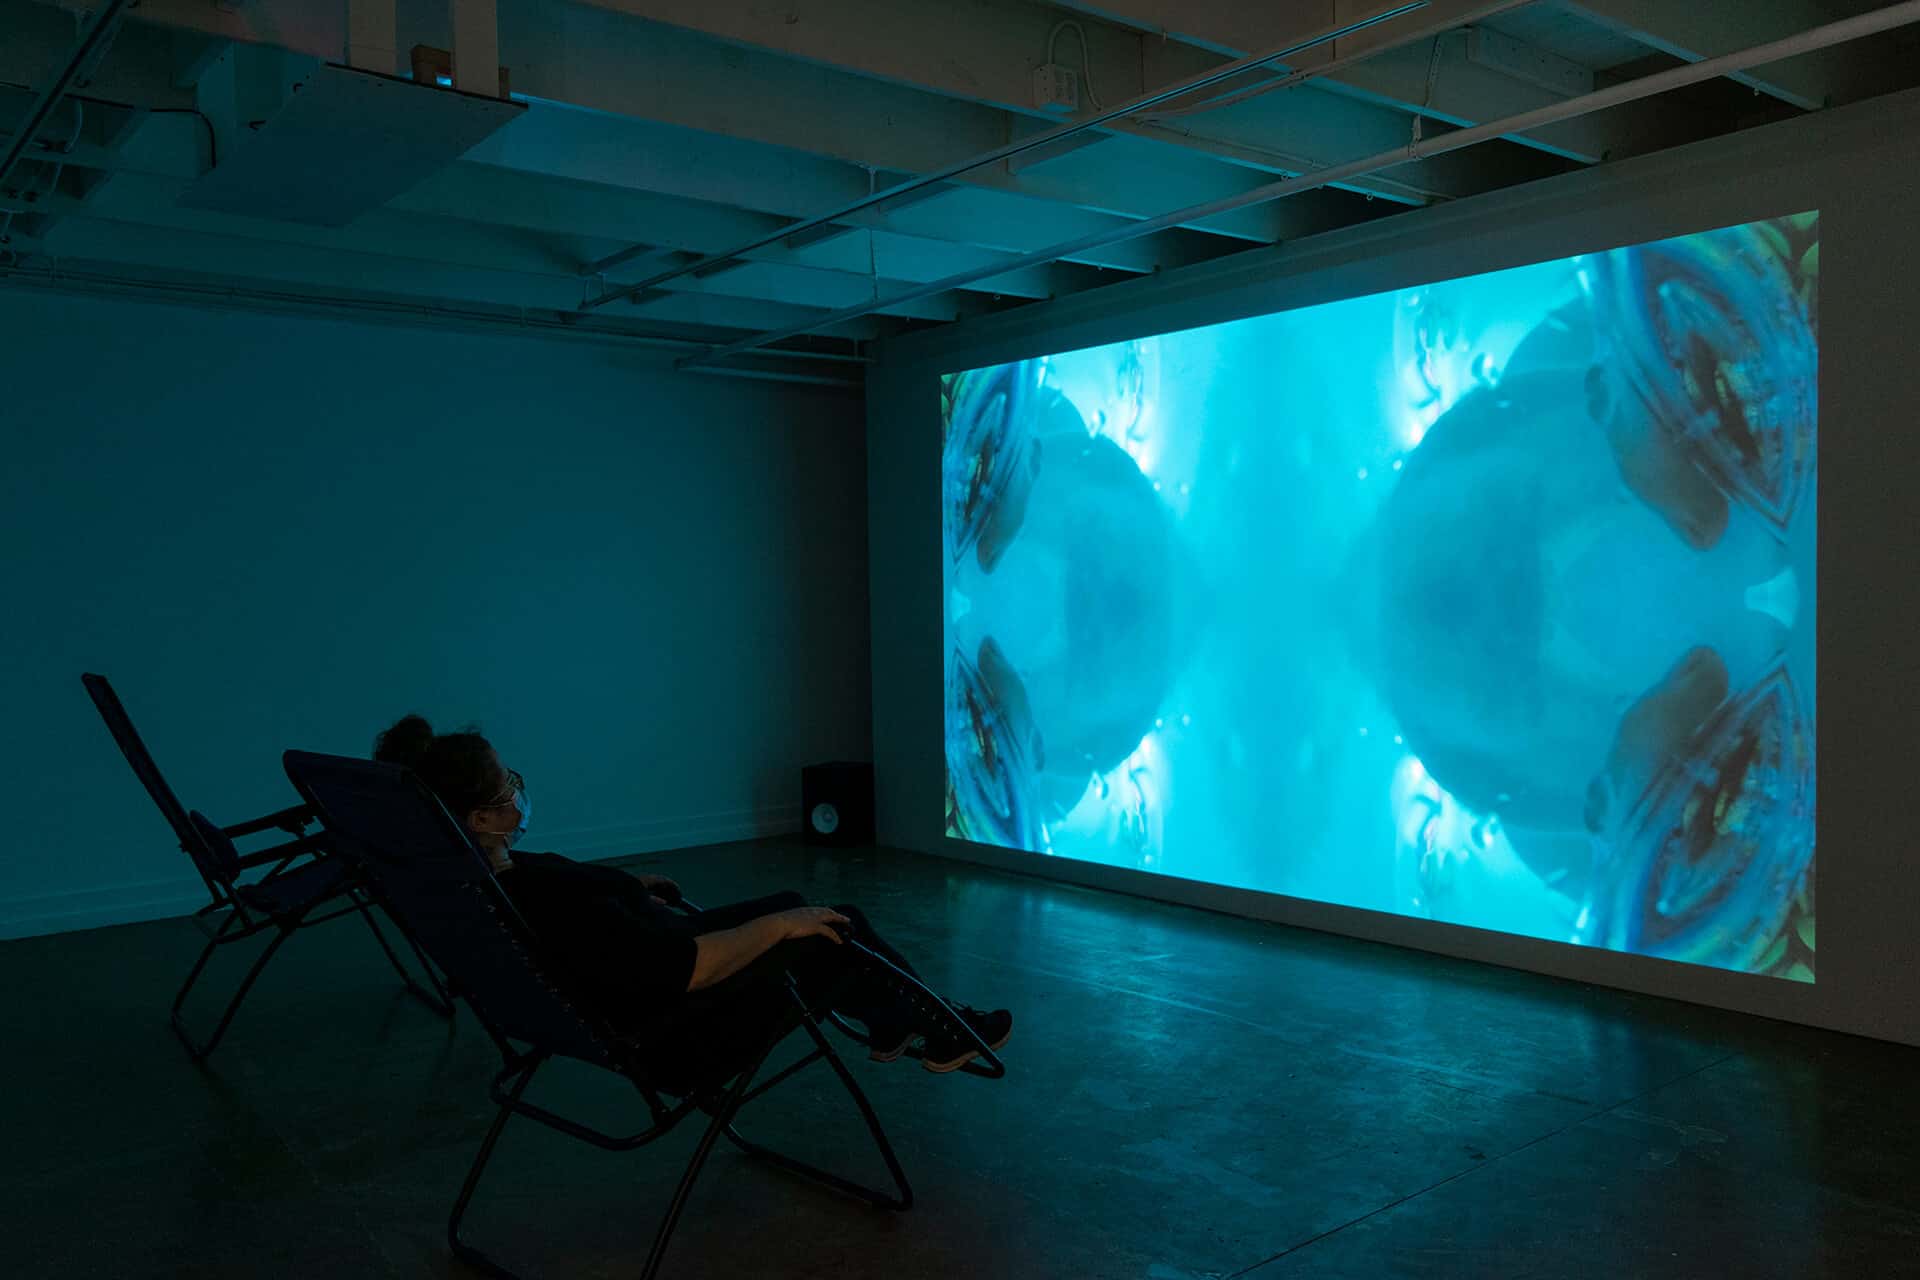 Installation view of Openings (Saekdong Seas), Jin-me Yoon, 2020. Photo by Brittany Nickerson.